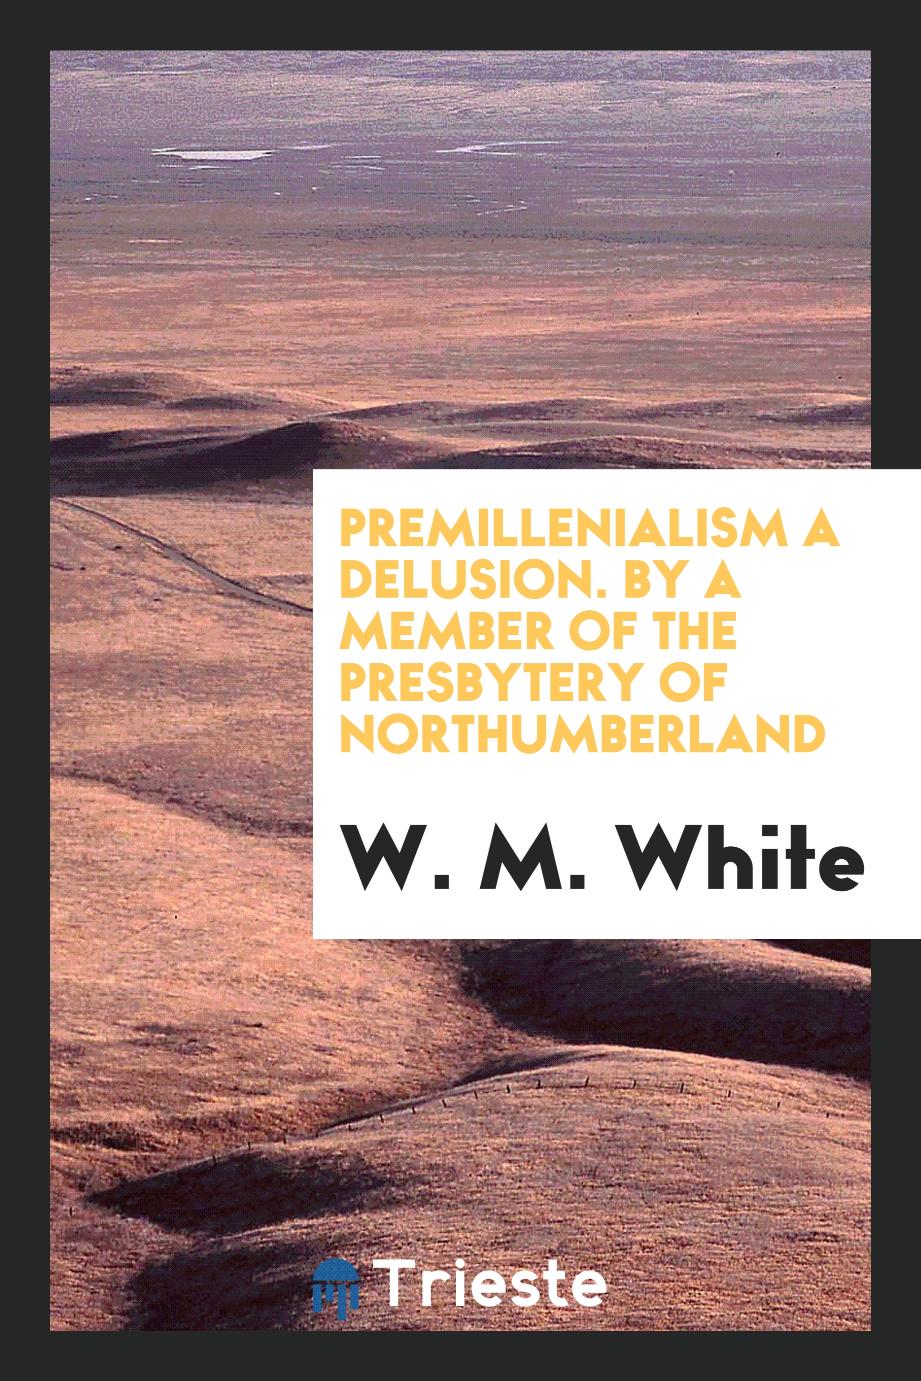 Premillenialism a Delusion. By a Member of the Presbytery of Northumberland